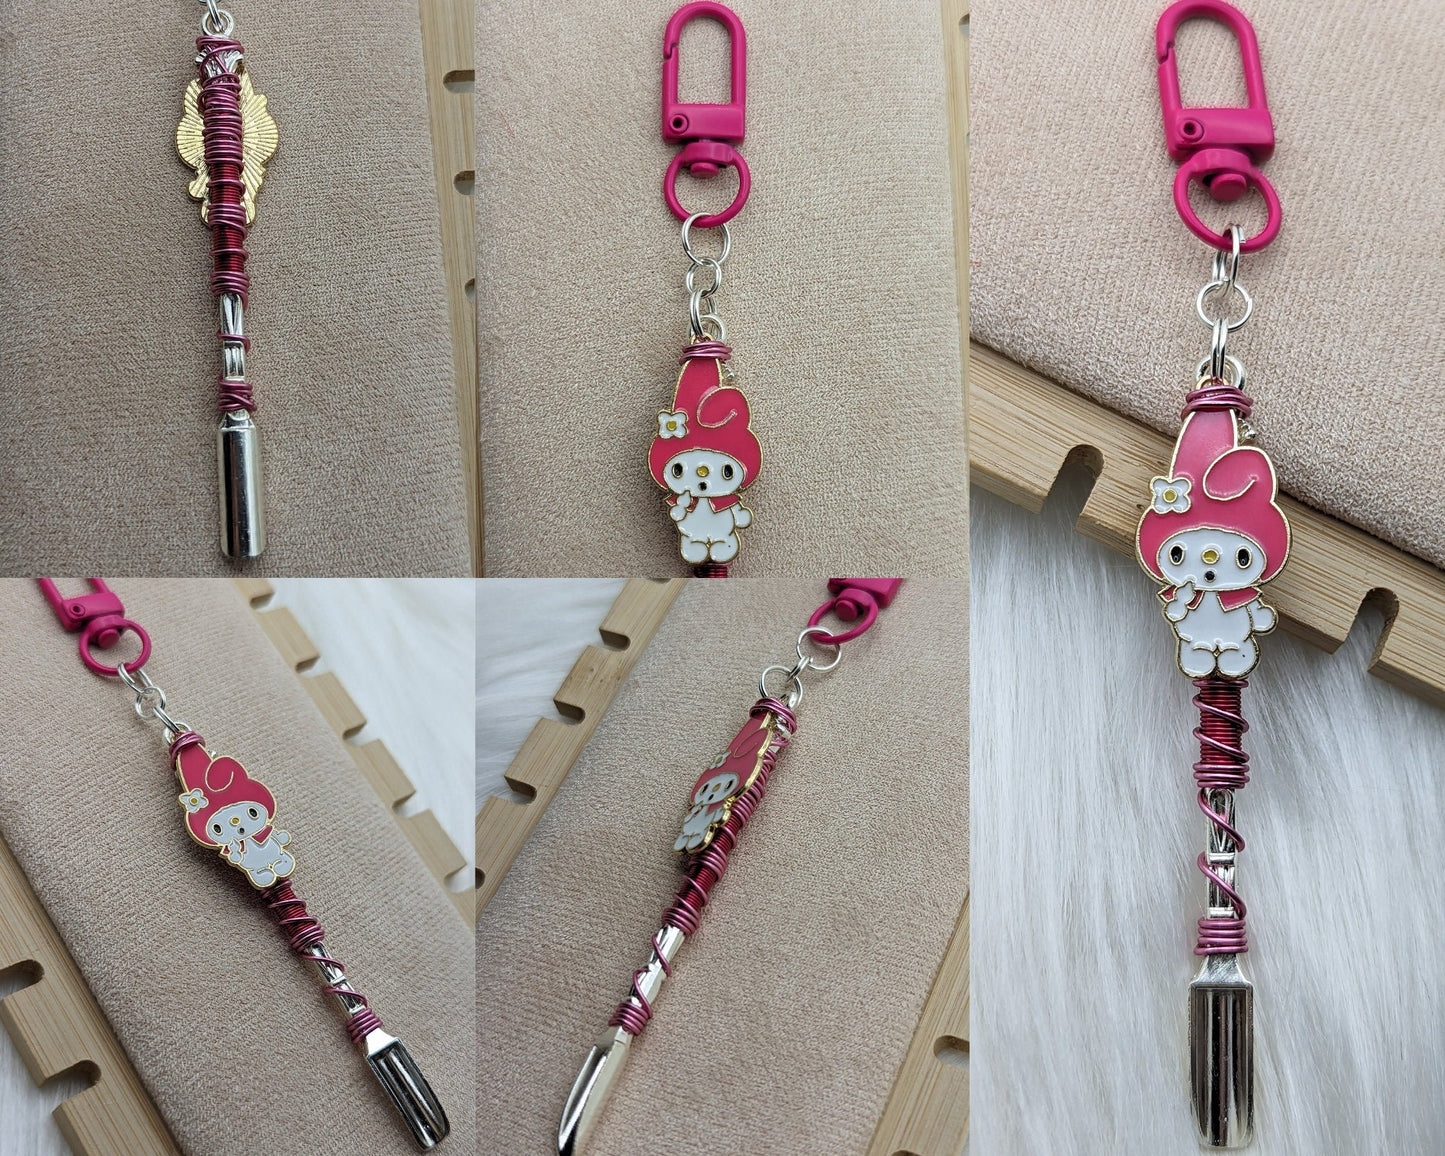 Kitty and Friends Wire Wrapped Mini Spoon Necklaces and Keychains - Groove Spoons